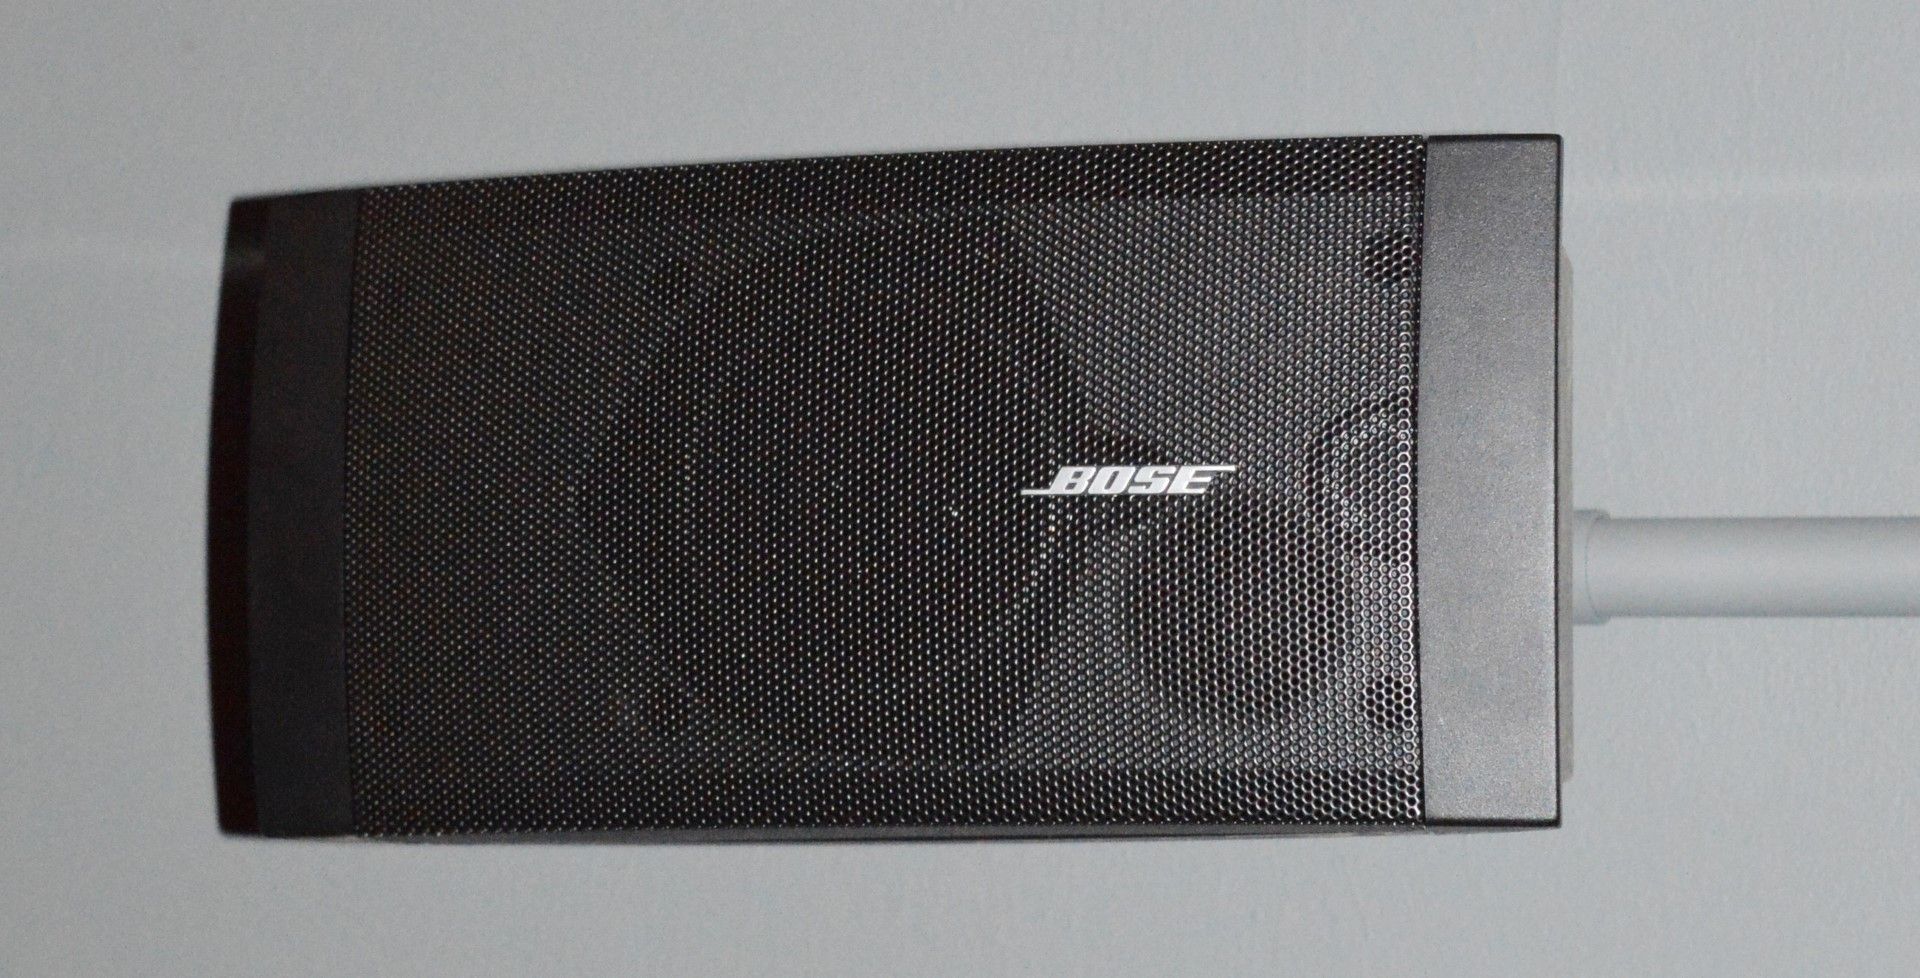 1 x Bose Freespace 9 Piece Speaker System - Includes 2 x Round Ceiling Speakers, 4 x Satellite - Image 3 of 4